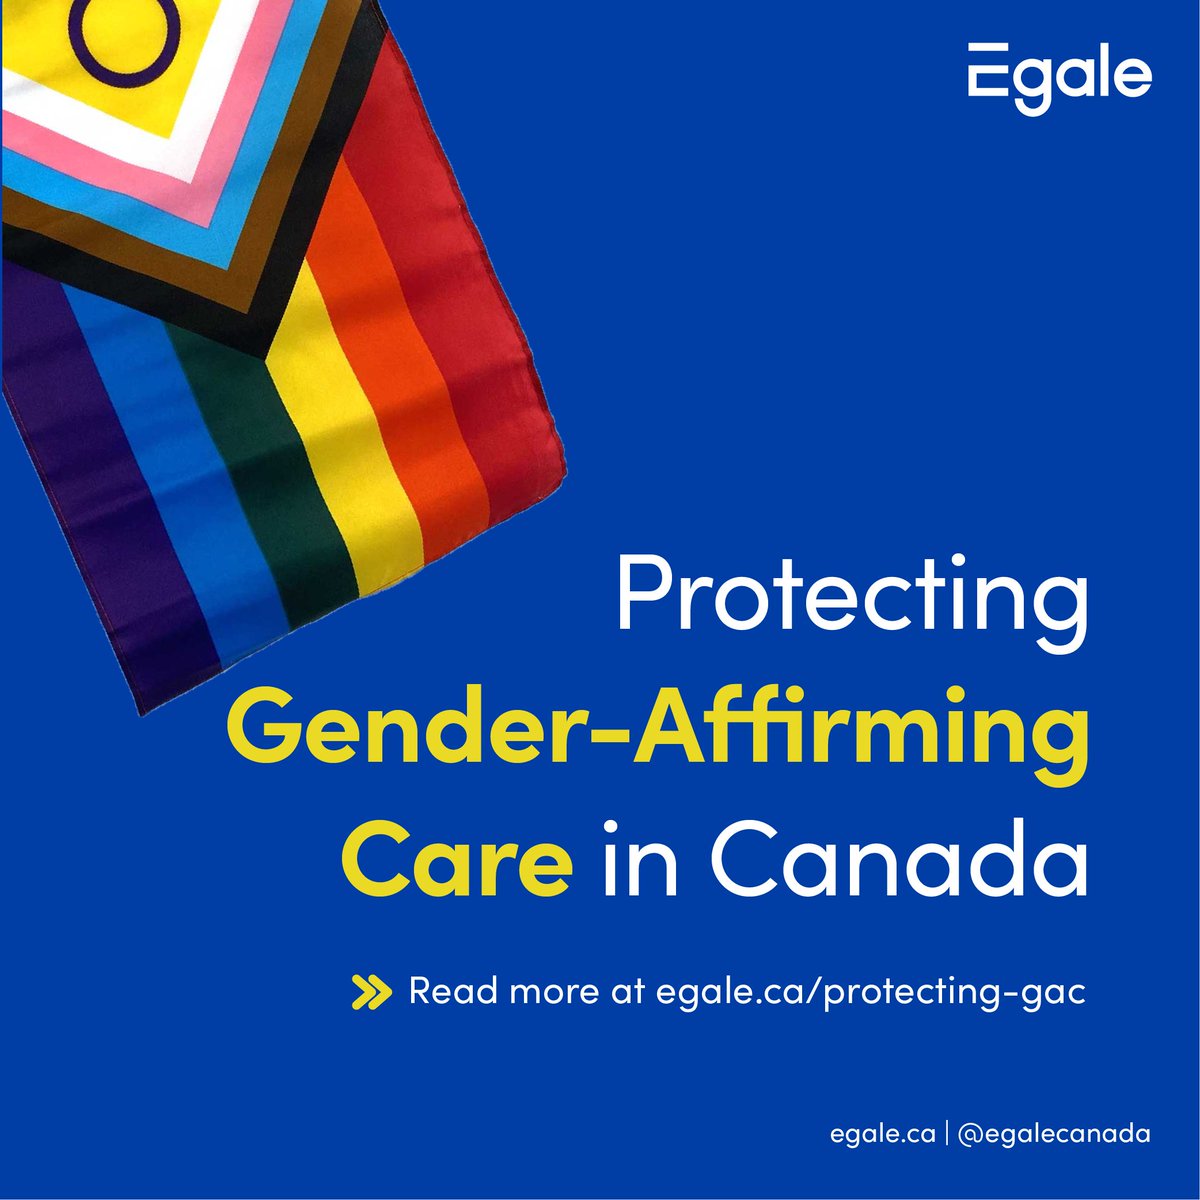 Everyone deserves to be able to access the health care they require, and Egale is fighting to make sure that this remains the case in Canada. But we can’t do it alone. Donate today in support of our work to protect 2SLGBTQI rights. Learn more and donate egale.ca/protecting-gac